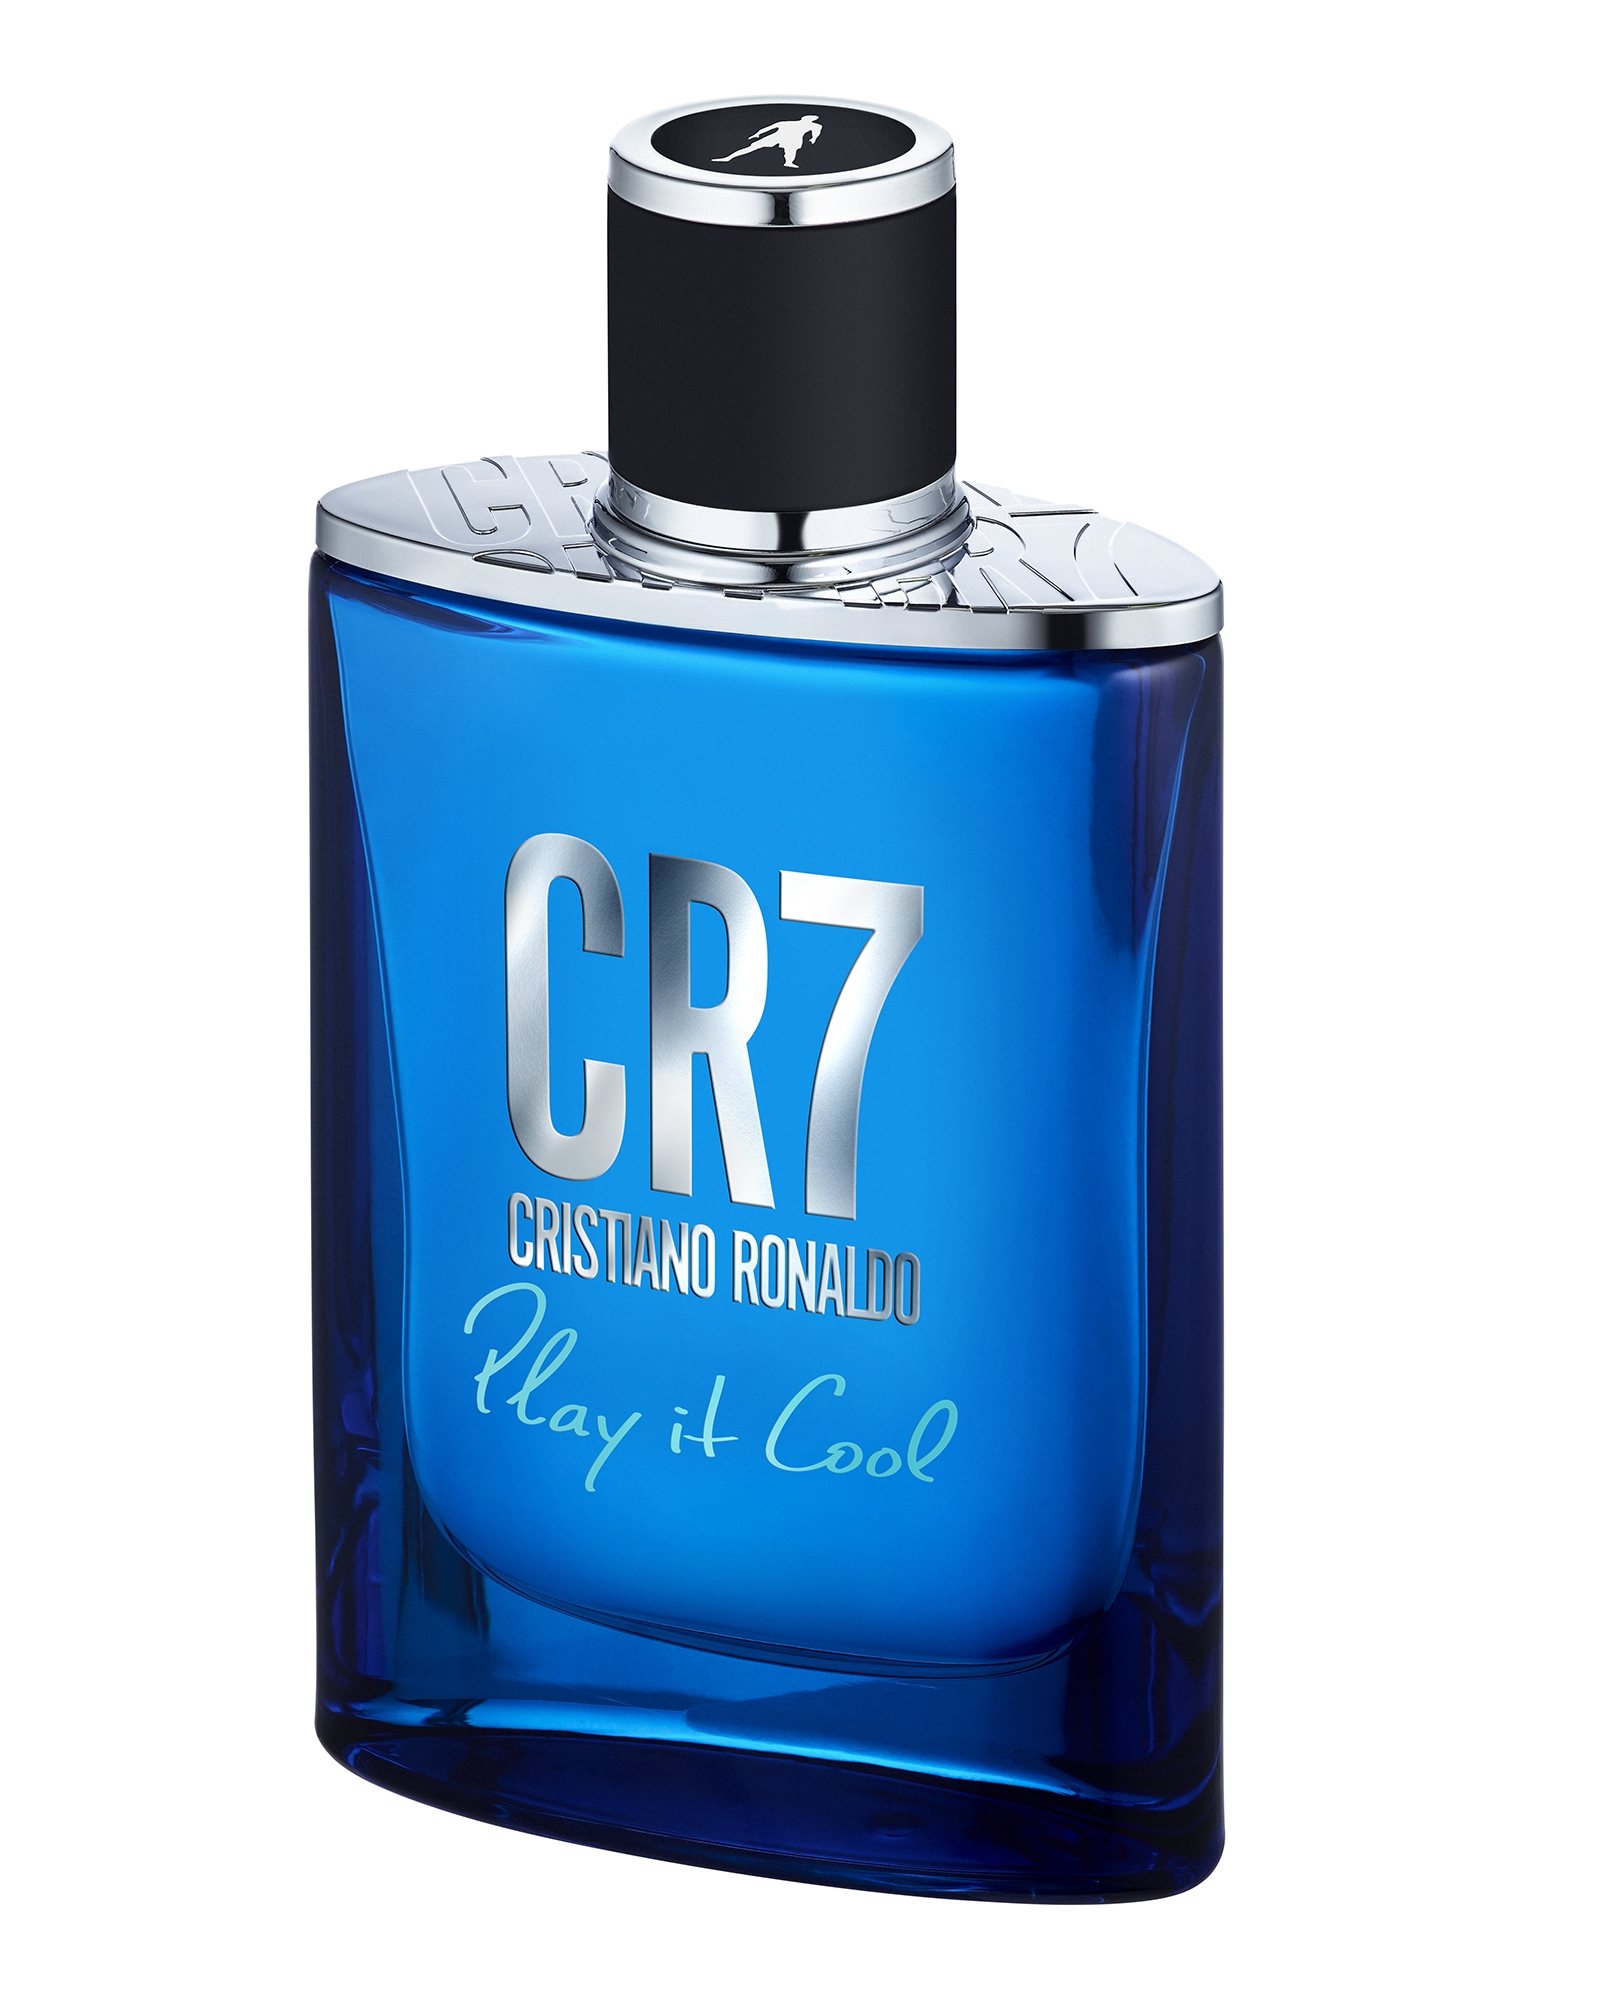 https://avvenice.com/72081/cr7-cristiano-ronaldo-the-brand-new-fragrance-play-it-cool-exclusive-collection-luxury-fragrance-50-ml.jpg